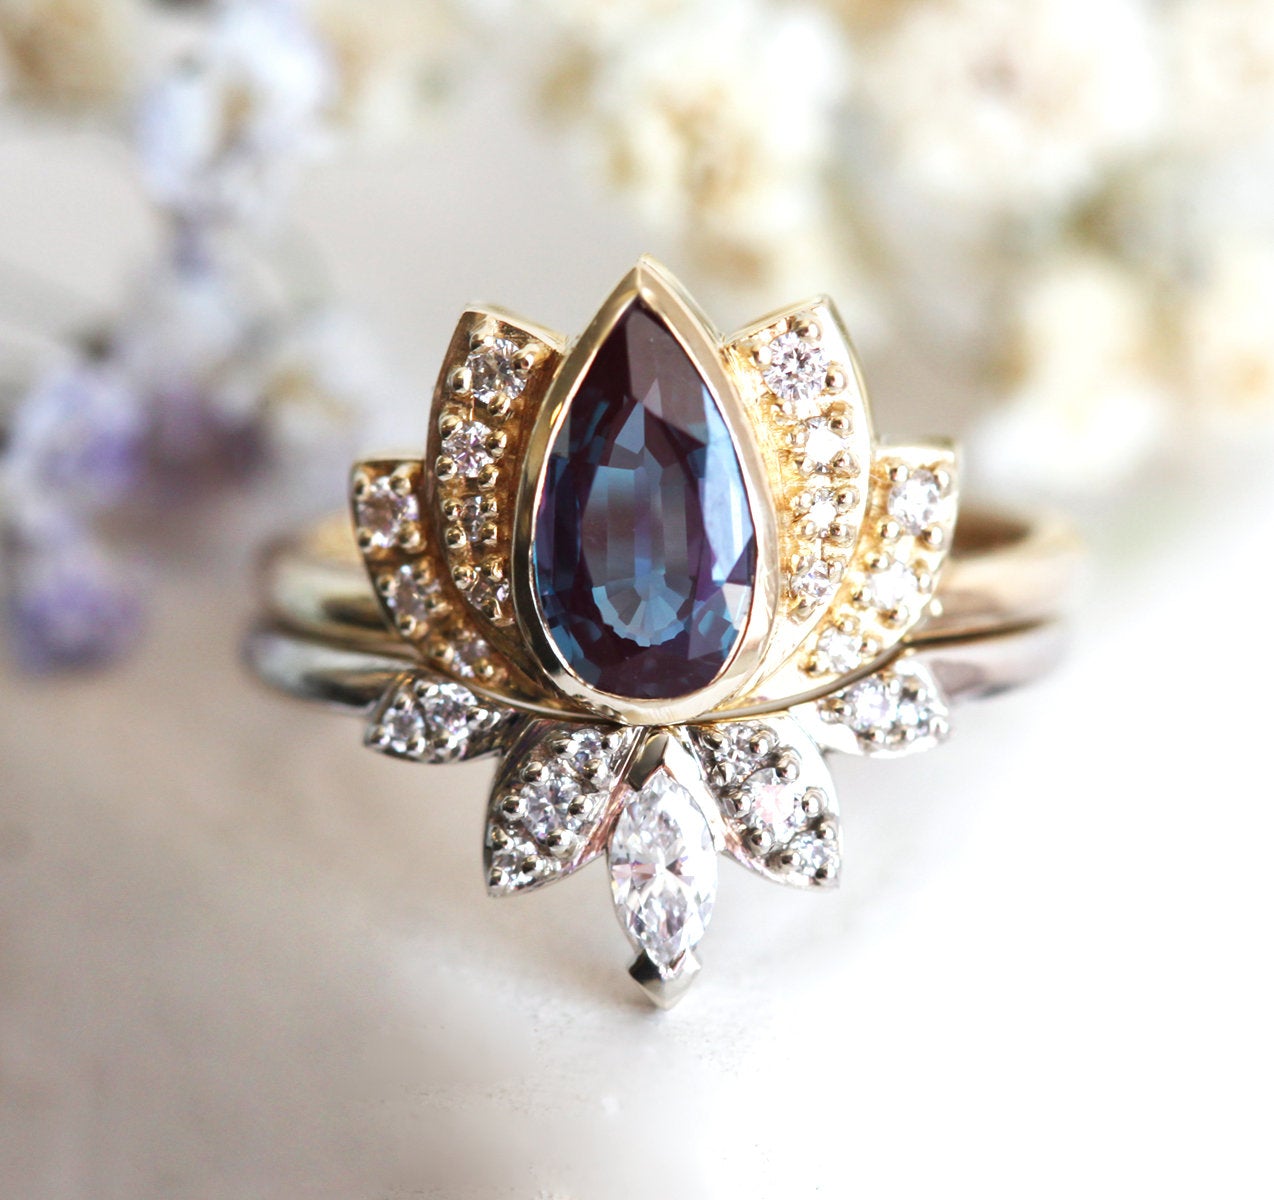 Teal Pear Alexandrite RIng Set with Round White Diamonds Inspired by Lotus Flower